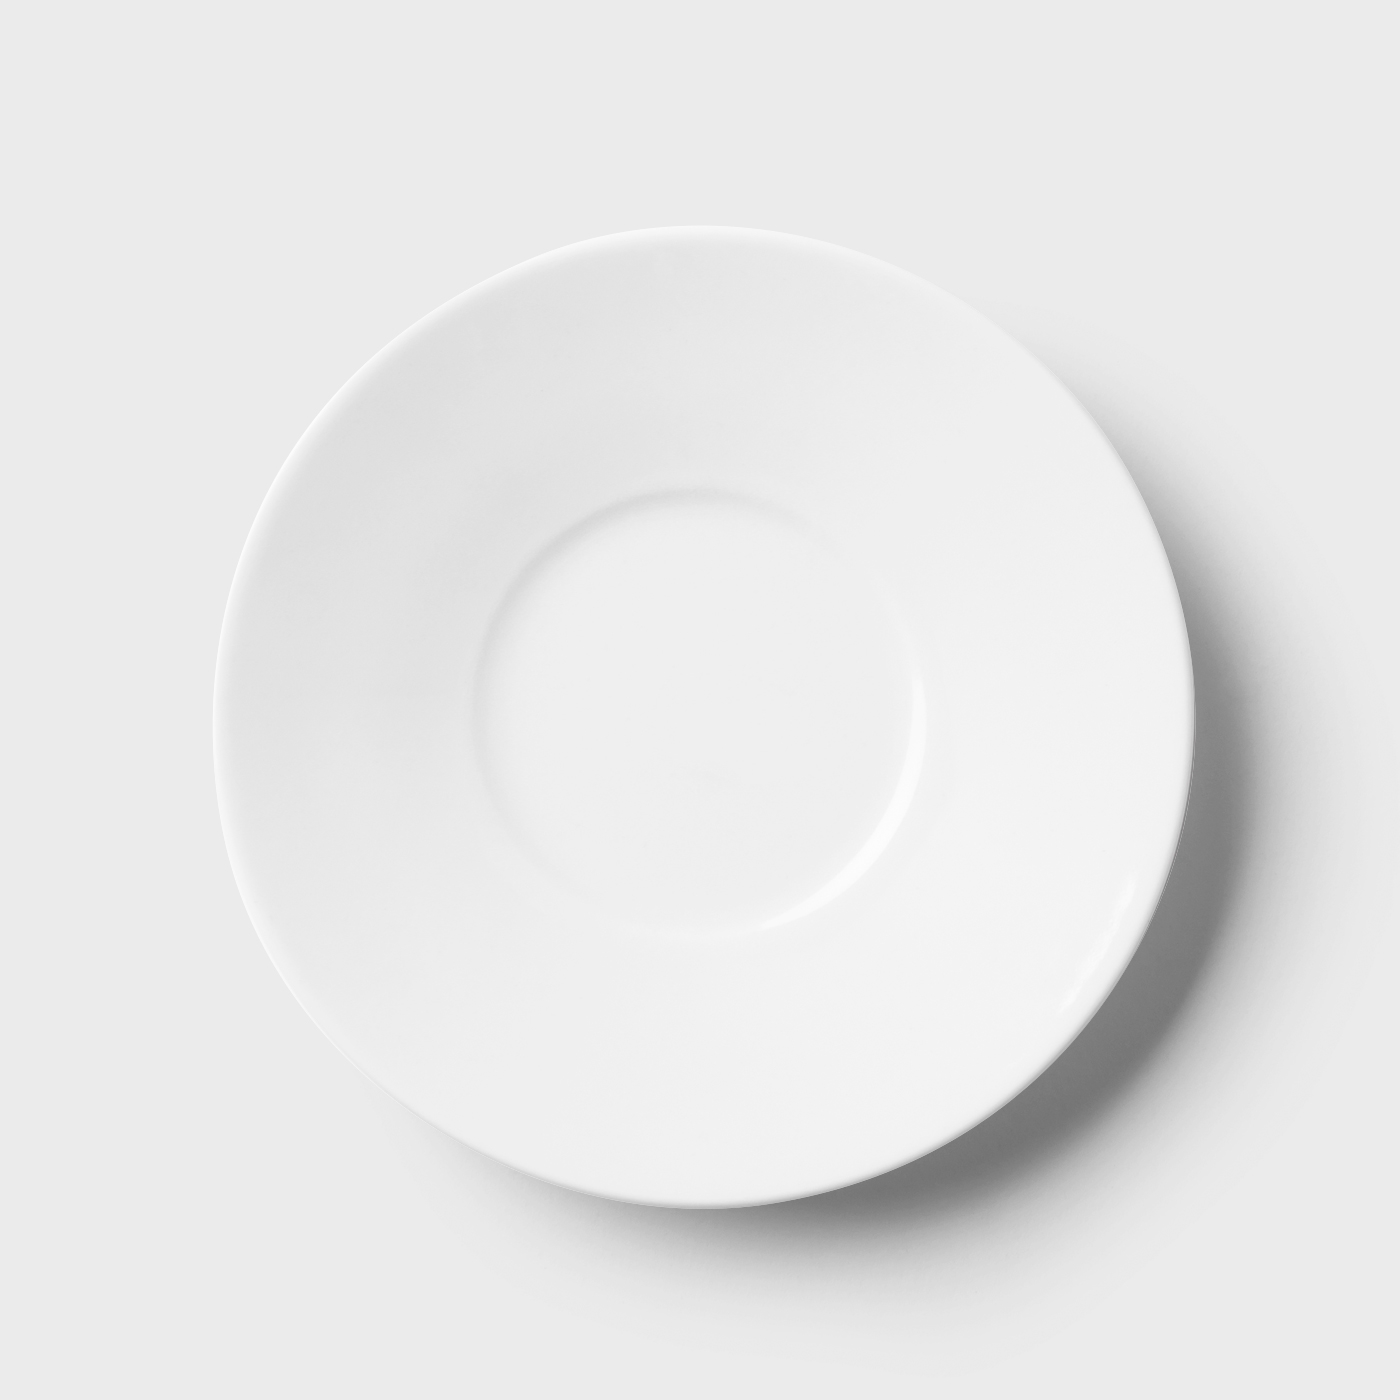 Top View of Simple Saucer Mockup FREE PSD